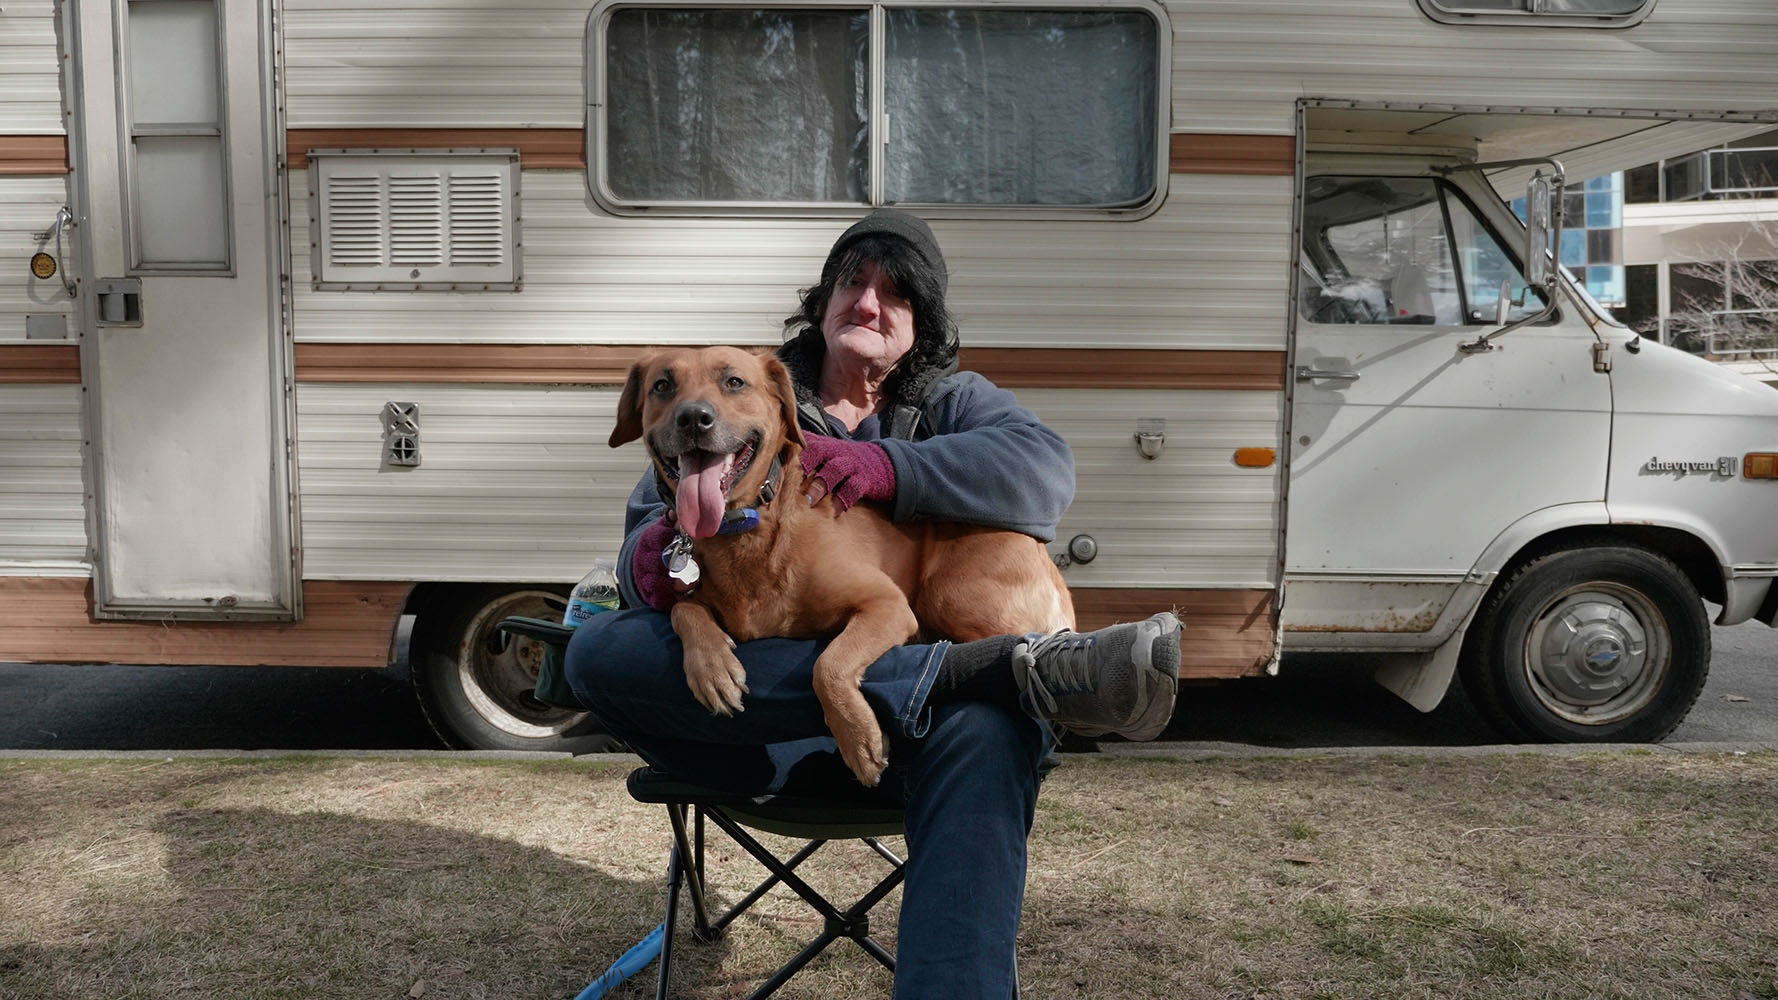 A person in a beanie with long black hair, sitting with a dog in front of a mobile home.